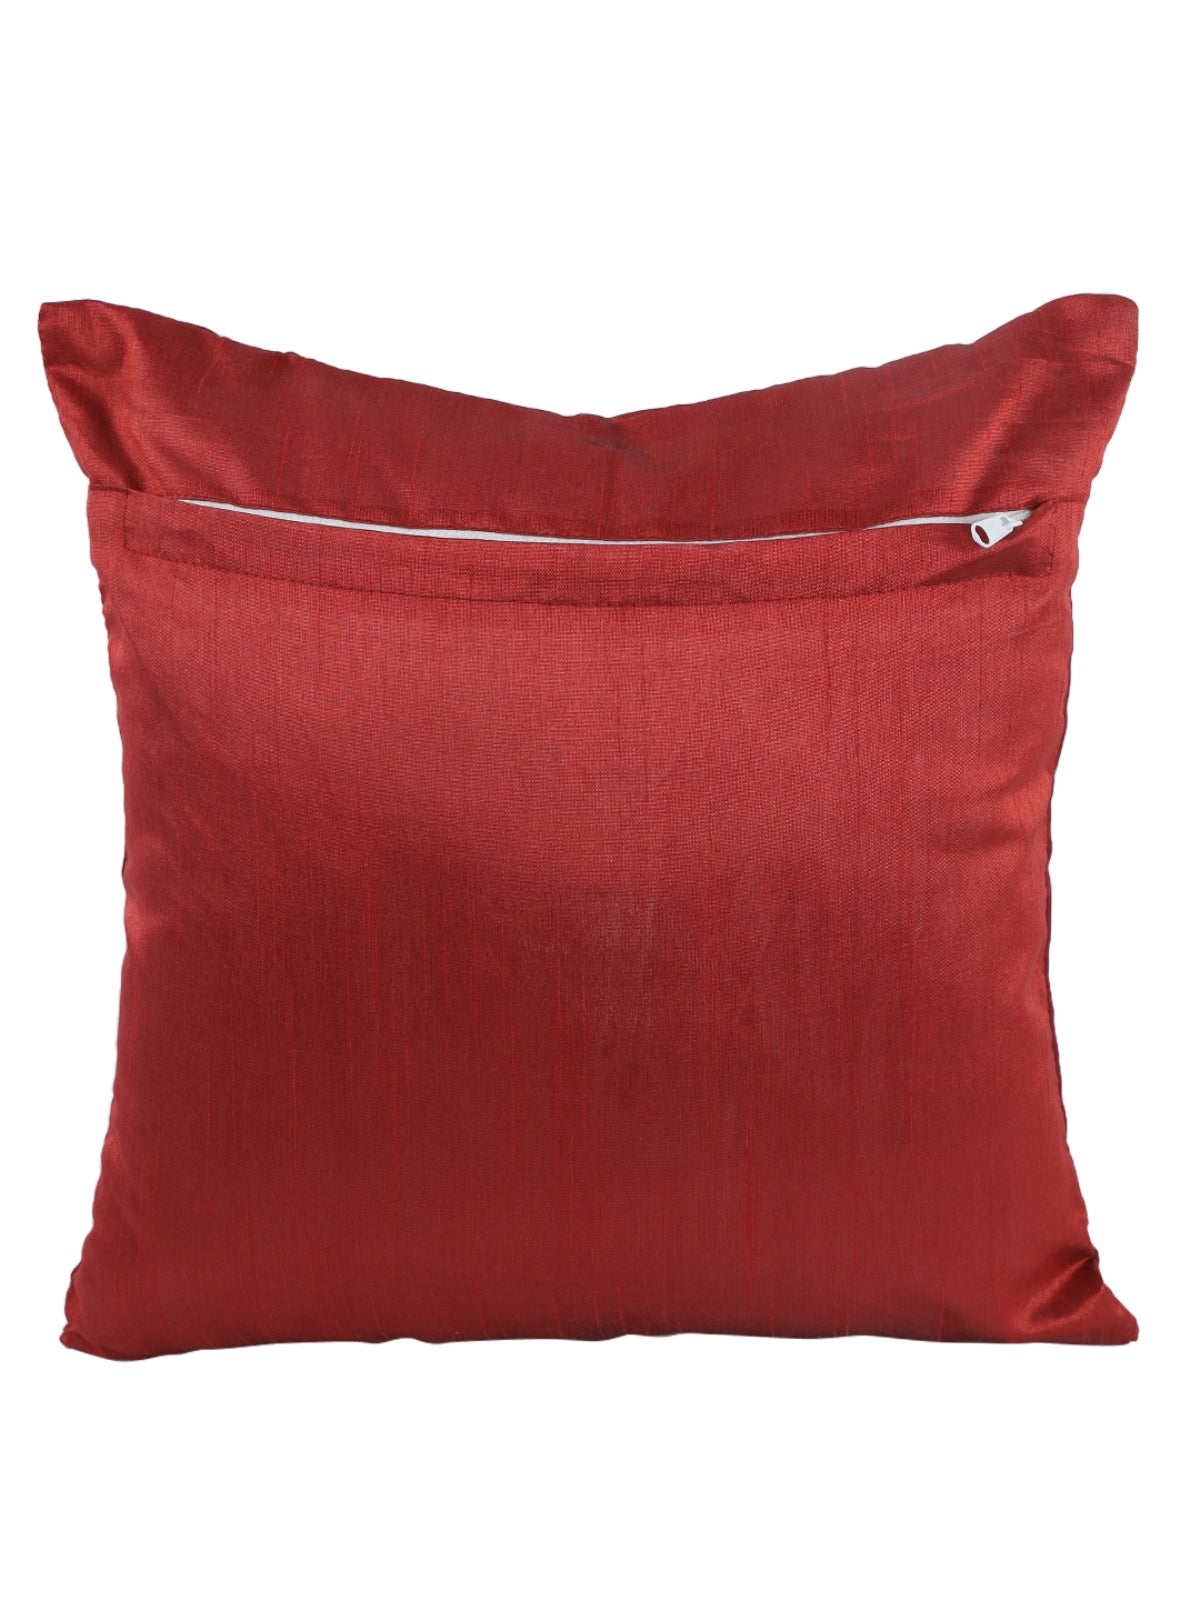 Maroon & Cream Set of 5 Polyester 16 Inch x 16 Inch Cushion Covers